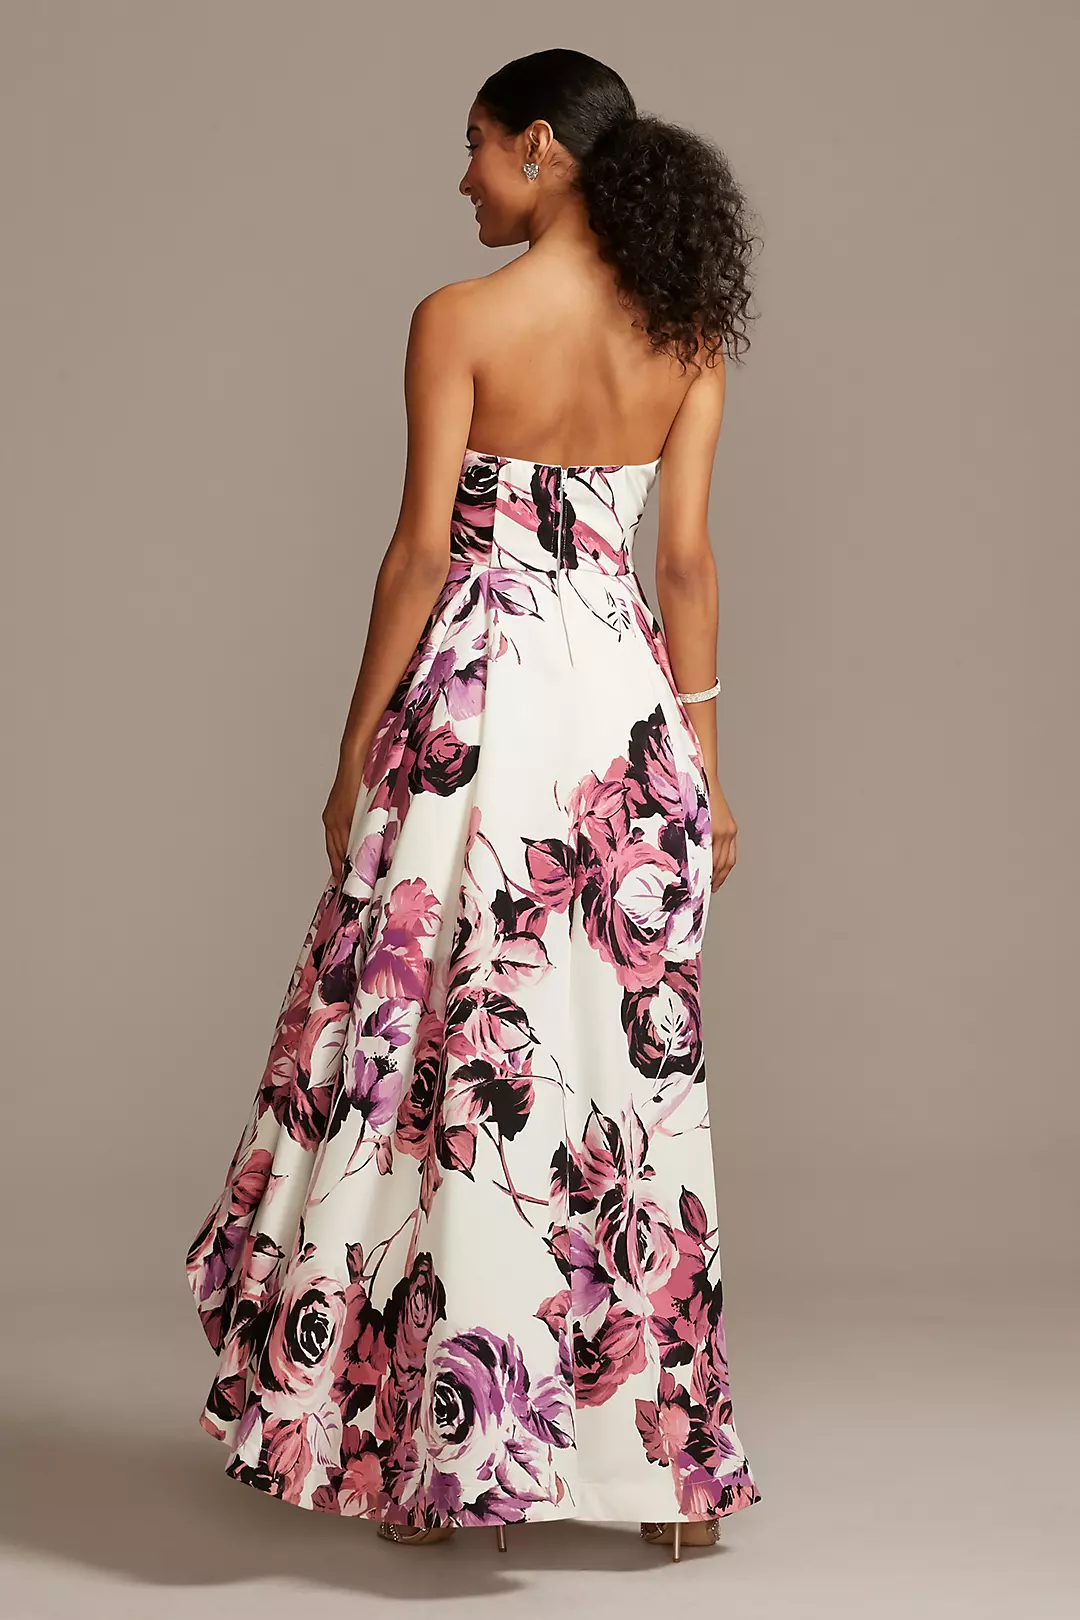 Strapless Floral High-Low Ball Gown Image 2